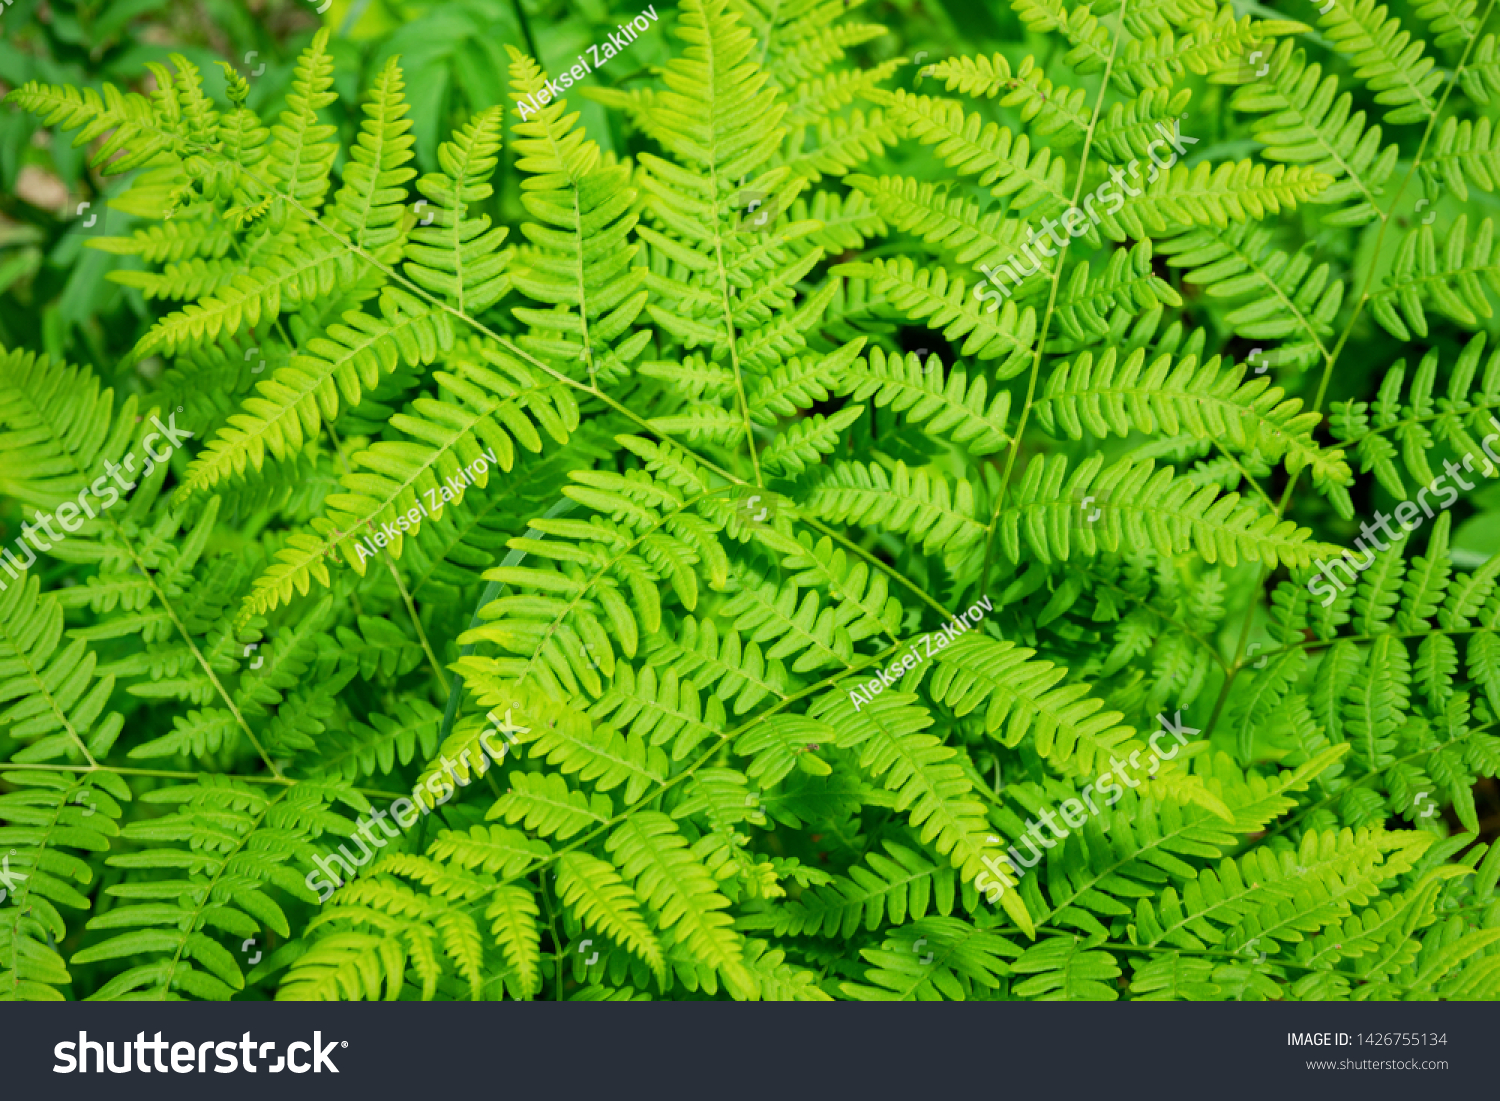 Beautyful ferns leaves green foliage natural floral fern background in sunlight. #1426755134